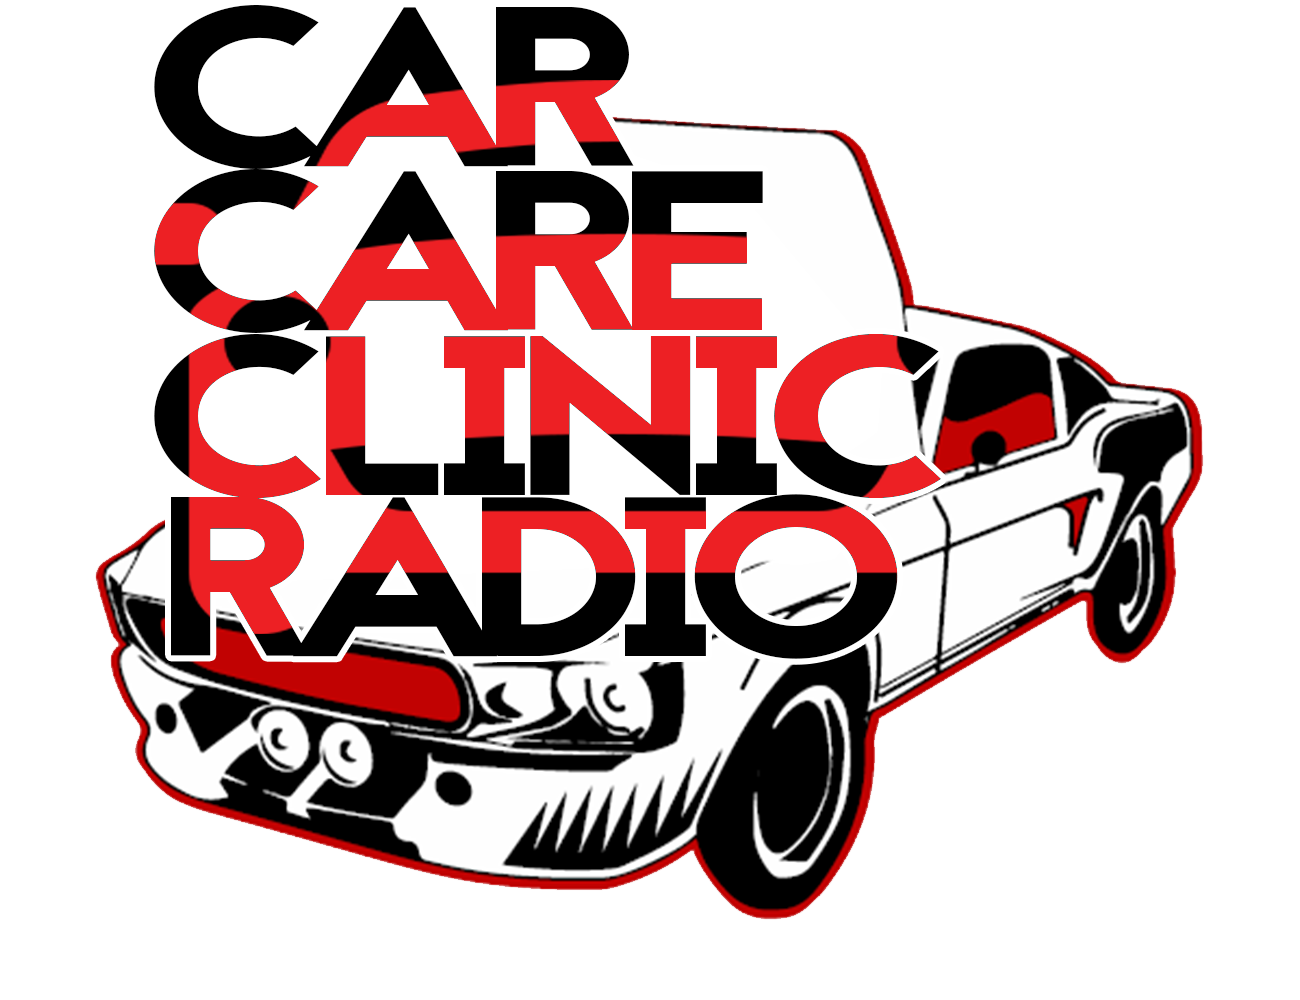 About the Show — Car Care Clinic Radio